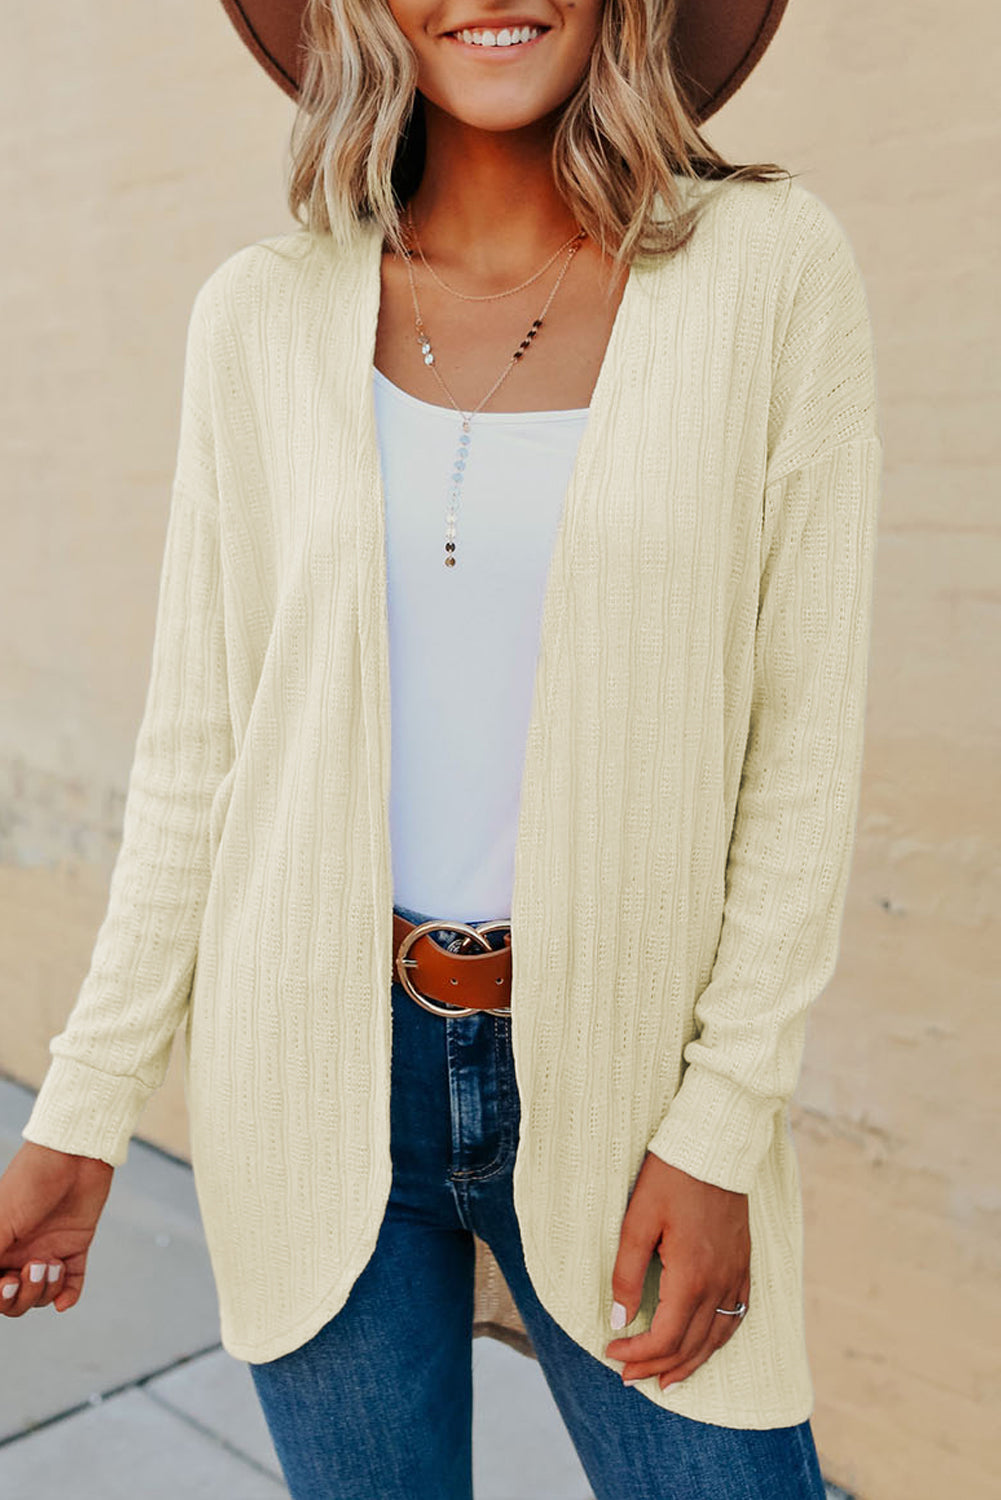 Get trendy with Long Sleeve Cardigan - Cardigans available at Styles Code. Grab yours today!